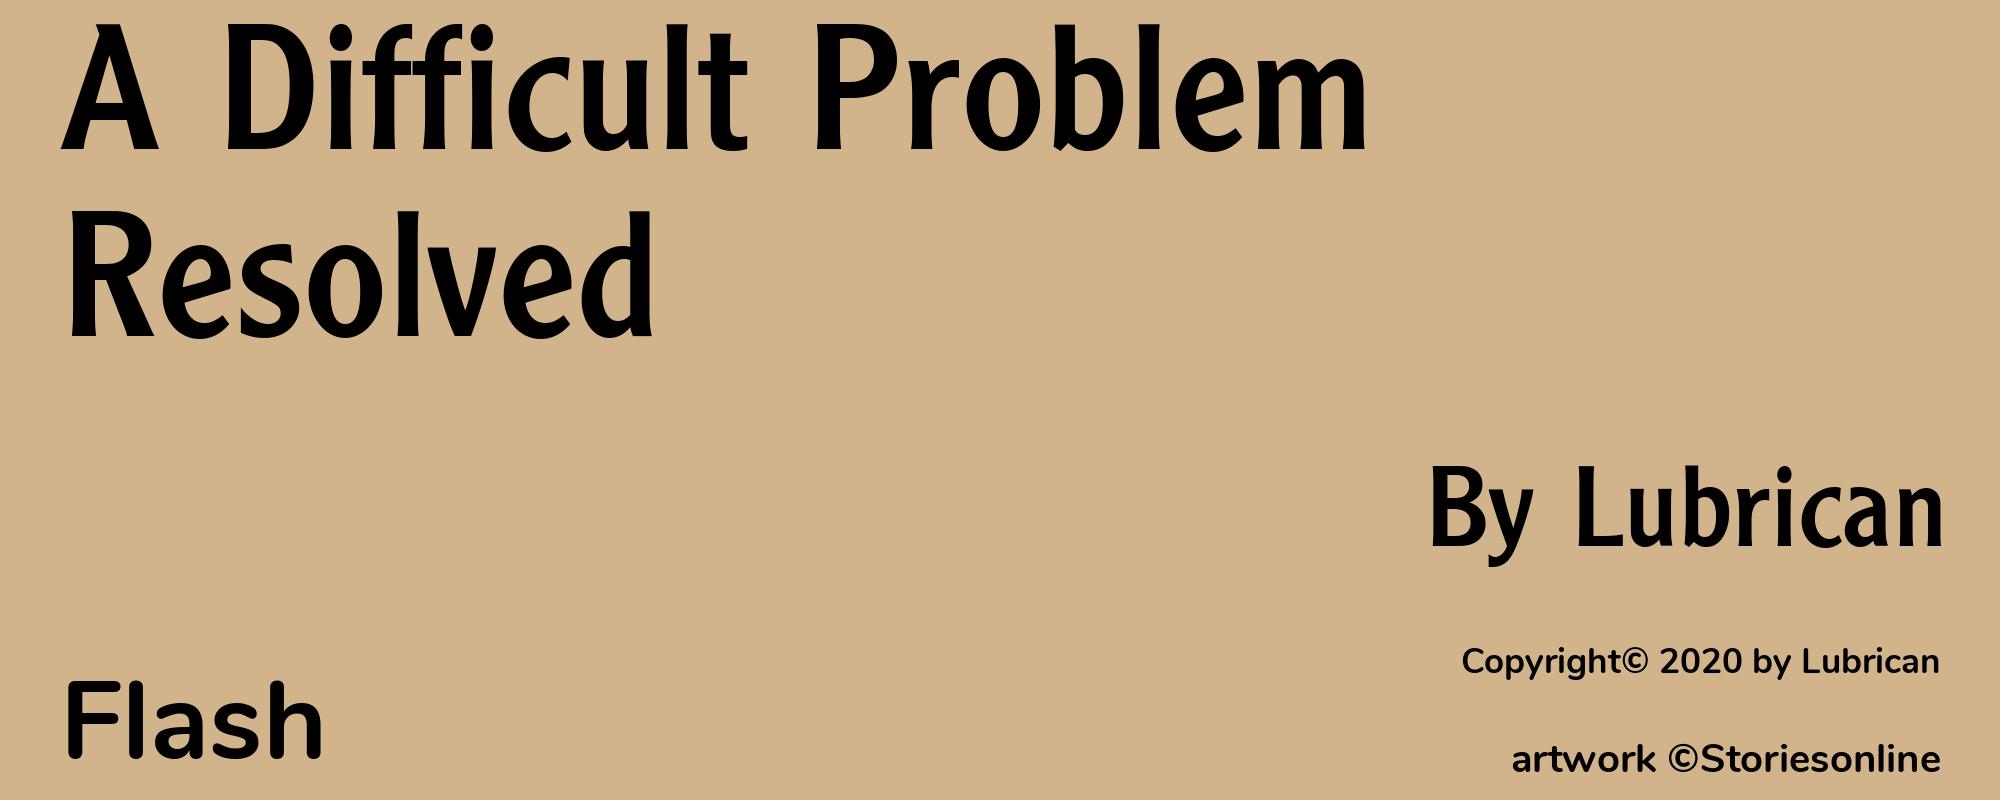 A Difficult Problem Resolved - Cover